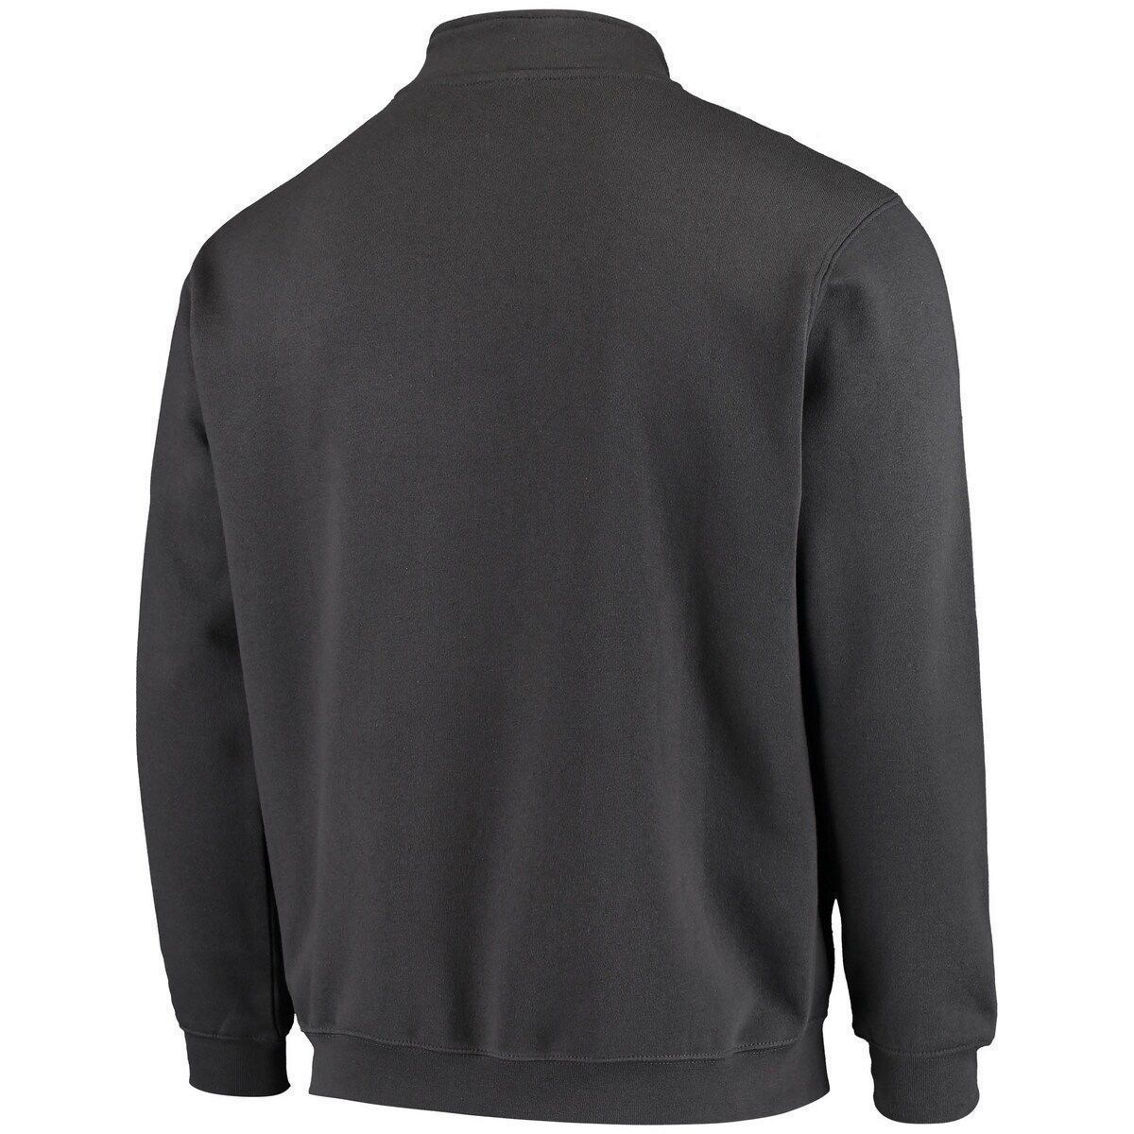 Colosseum Men's Charcoal Army Black Knights Tortugas Logo Quarter-Zip Jacket - Image 4 of 4